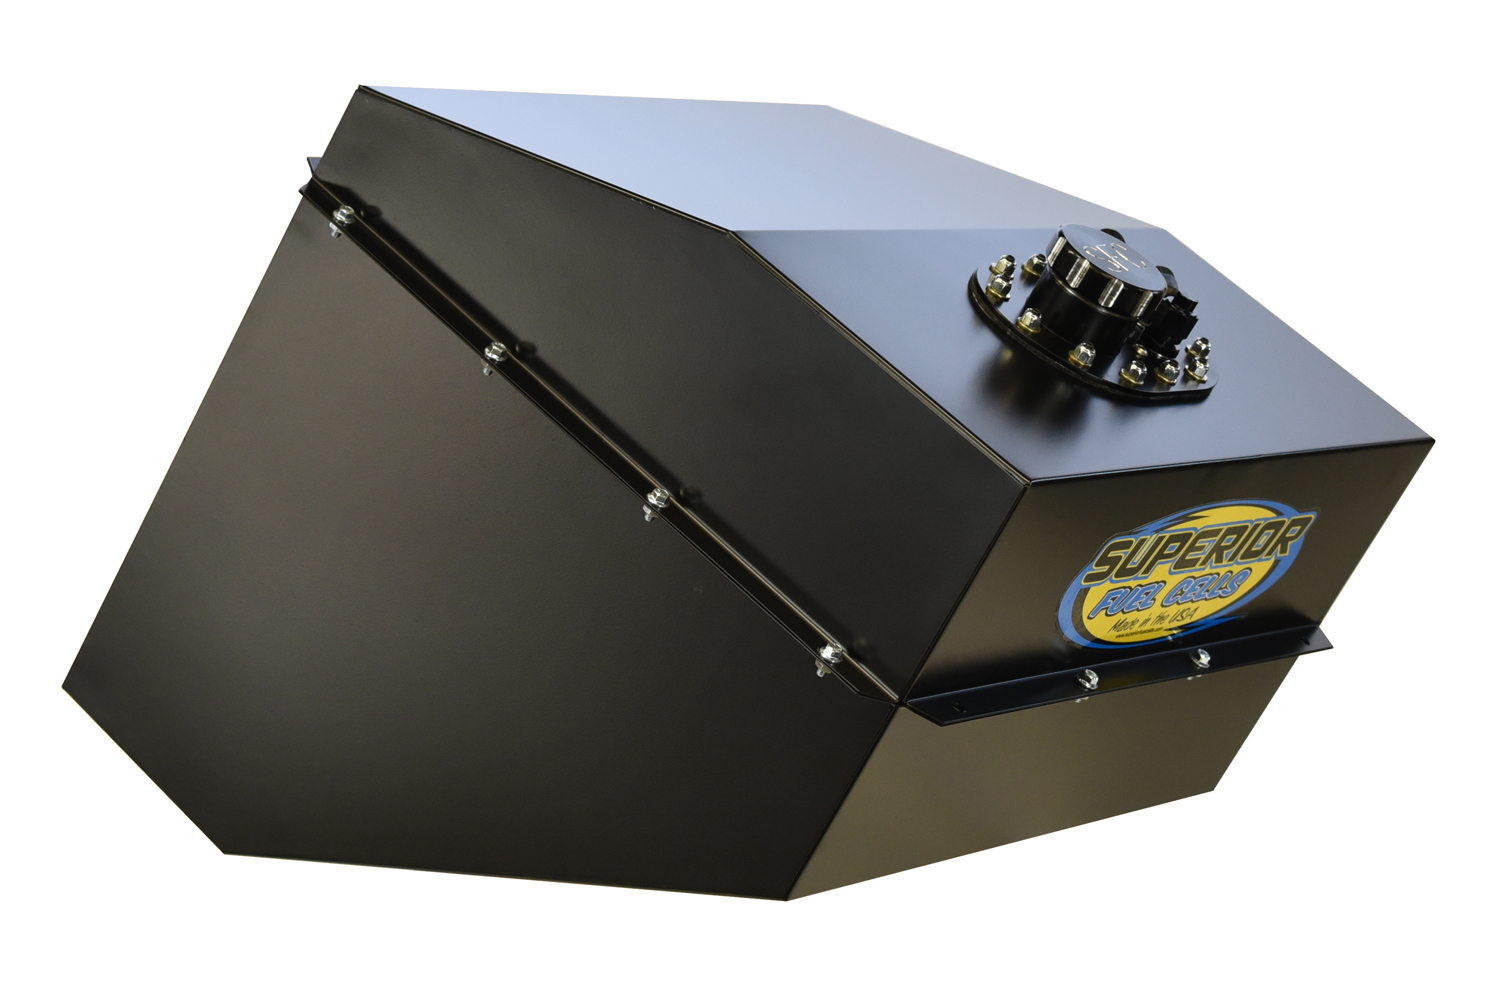 Superior Fuel Cells SFC26TF-BL-SFI Fuel Cell and Can, 26 gal, SFI, 20-3/4 in Deep x 19-1/2 in Wide, 10 AN Male Outlet, 8 AN Male Return, 6 AN Rollover Valve, Foam, Steel, Black Powder Coat, Dirt Late Model / Modified, Each